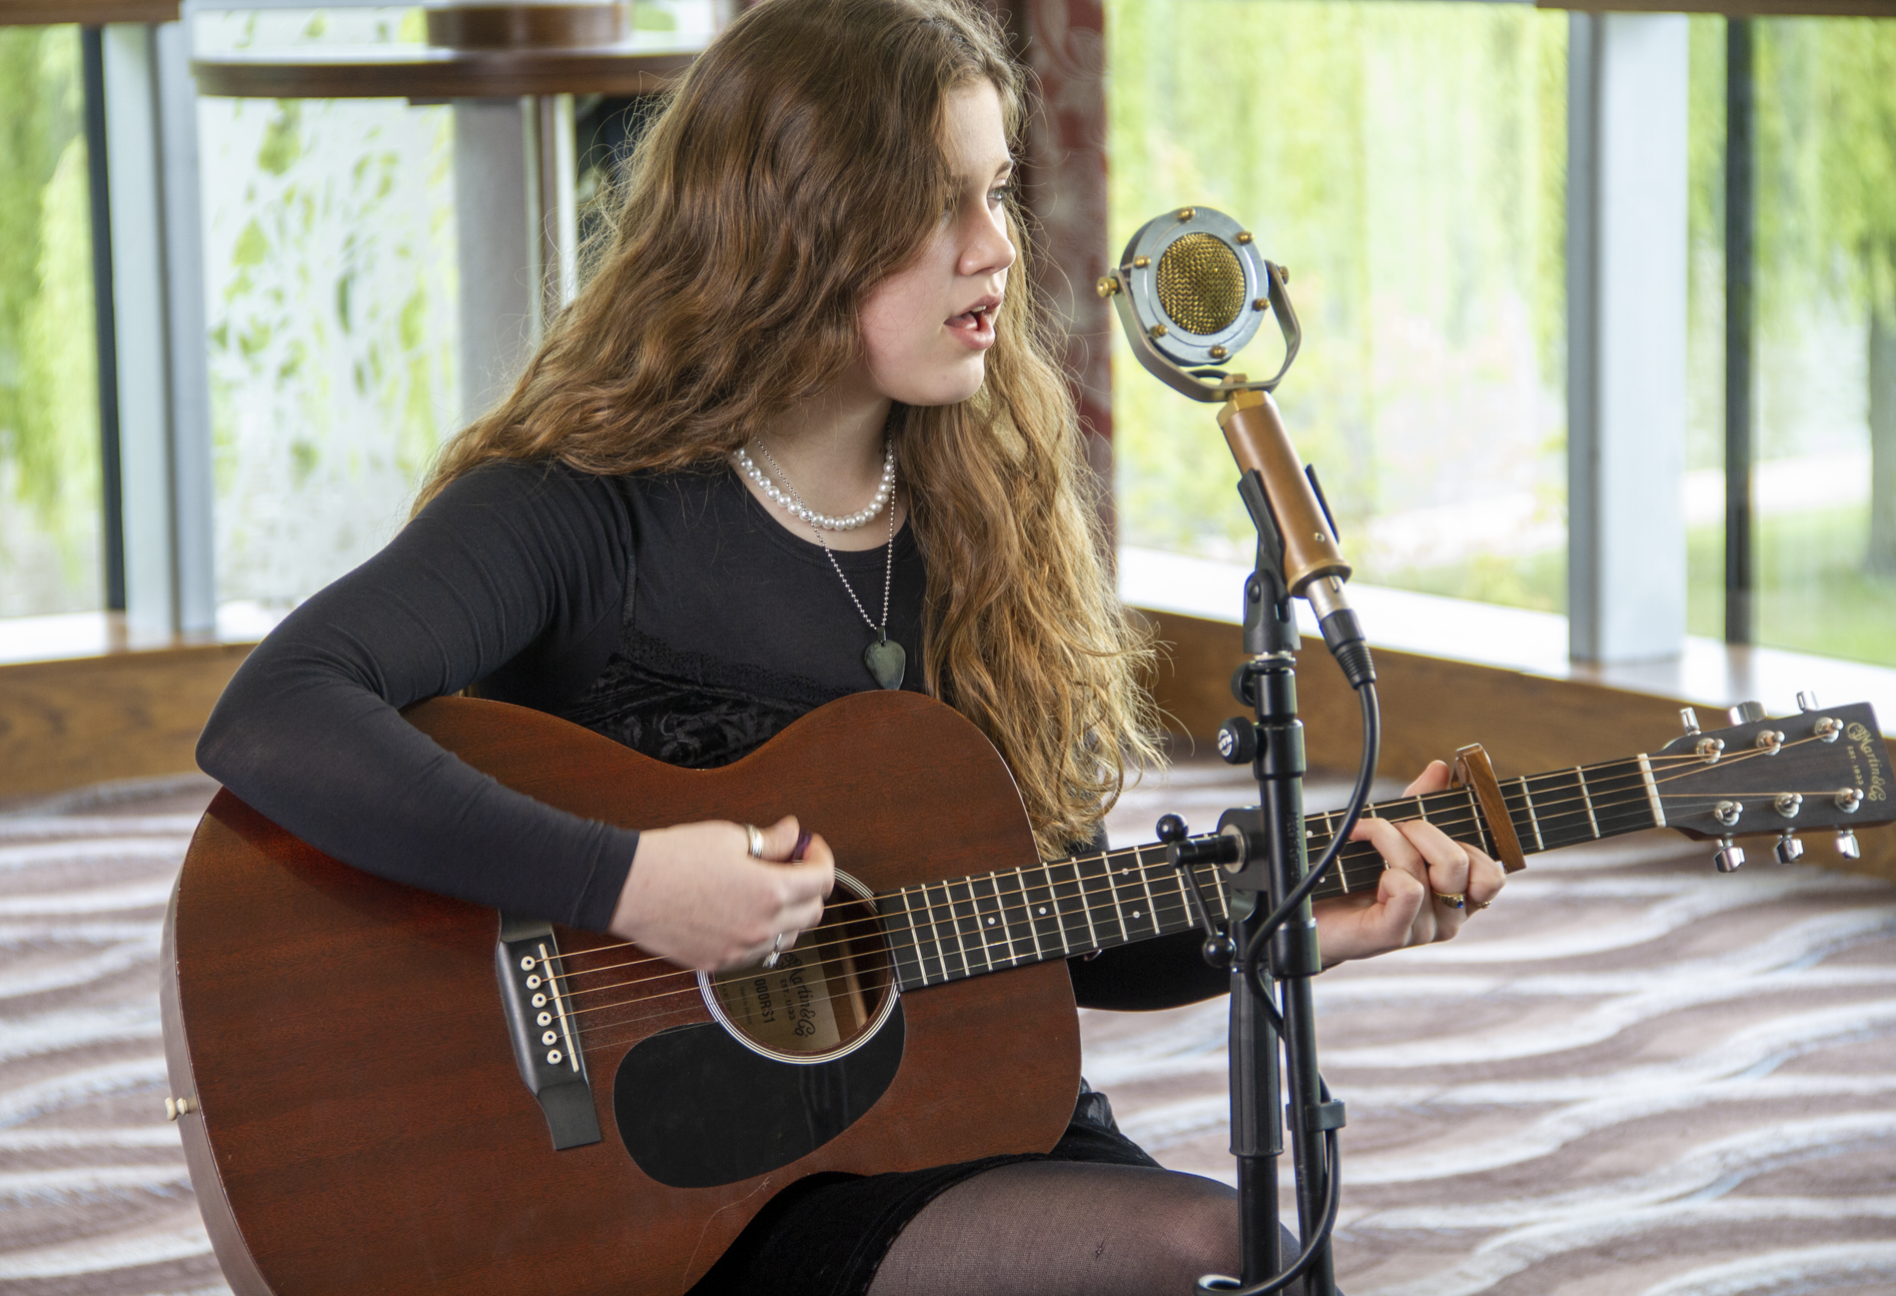 a young woman with white skin and brown hair sings into a microphone, she is playing a guitar and wearing all black.